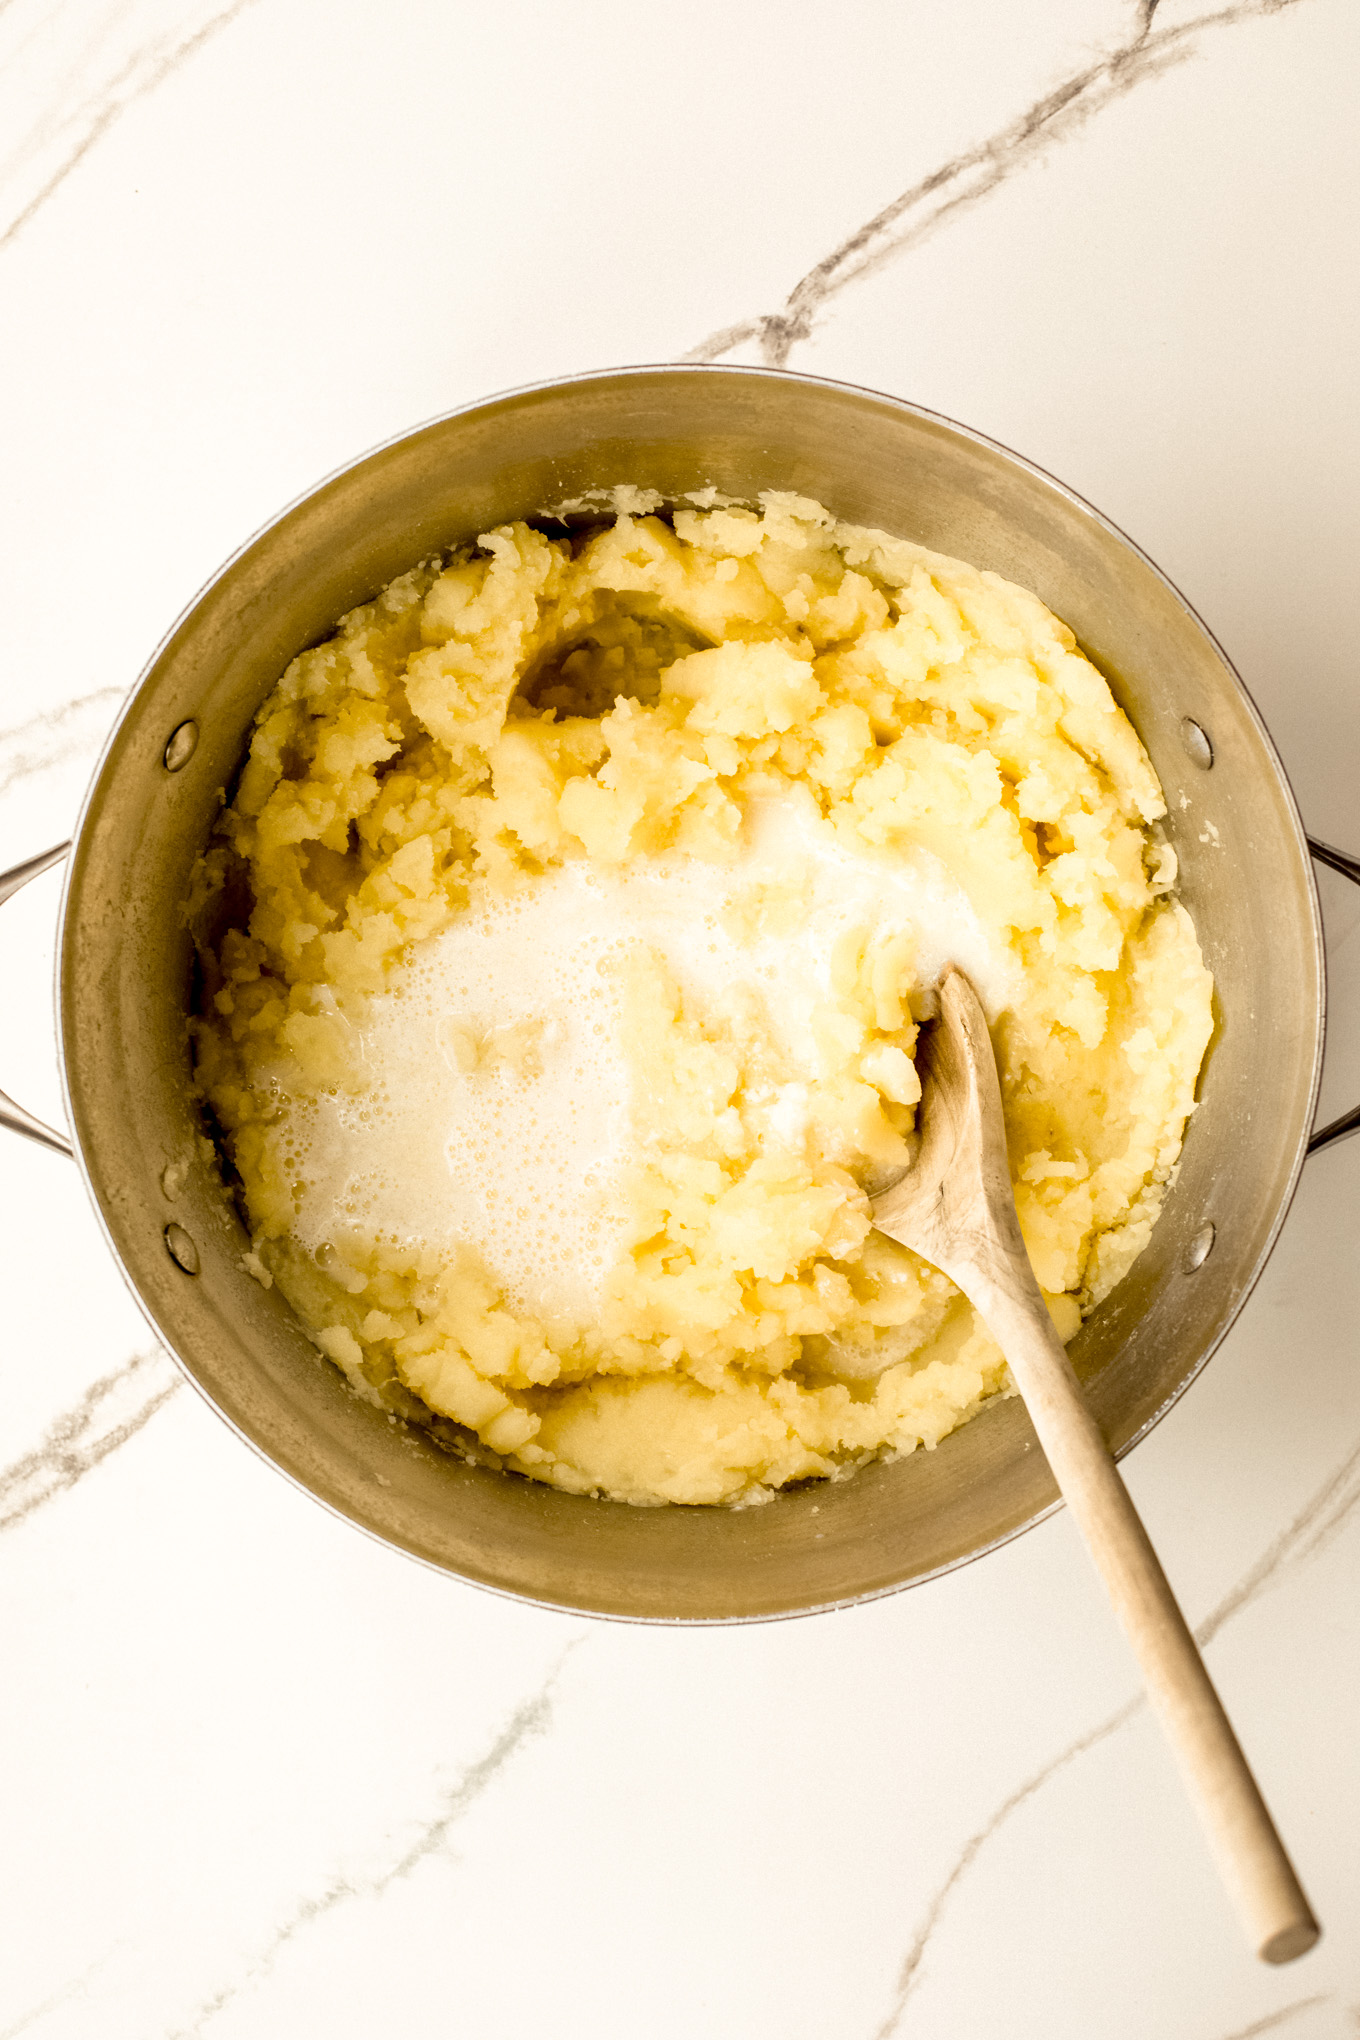 mashed potatoes with milk and wooden spoon.